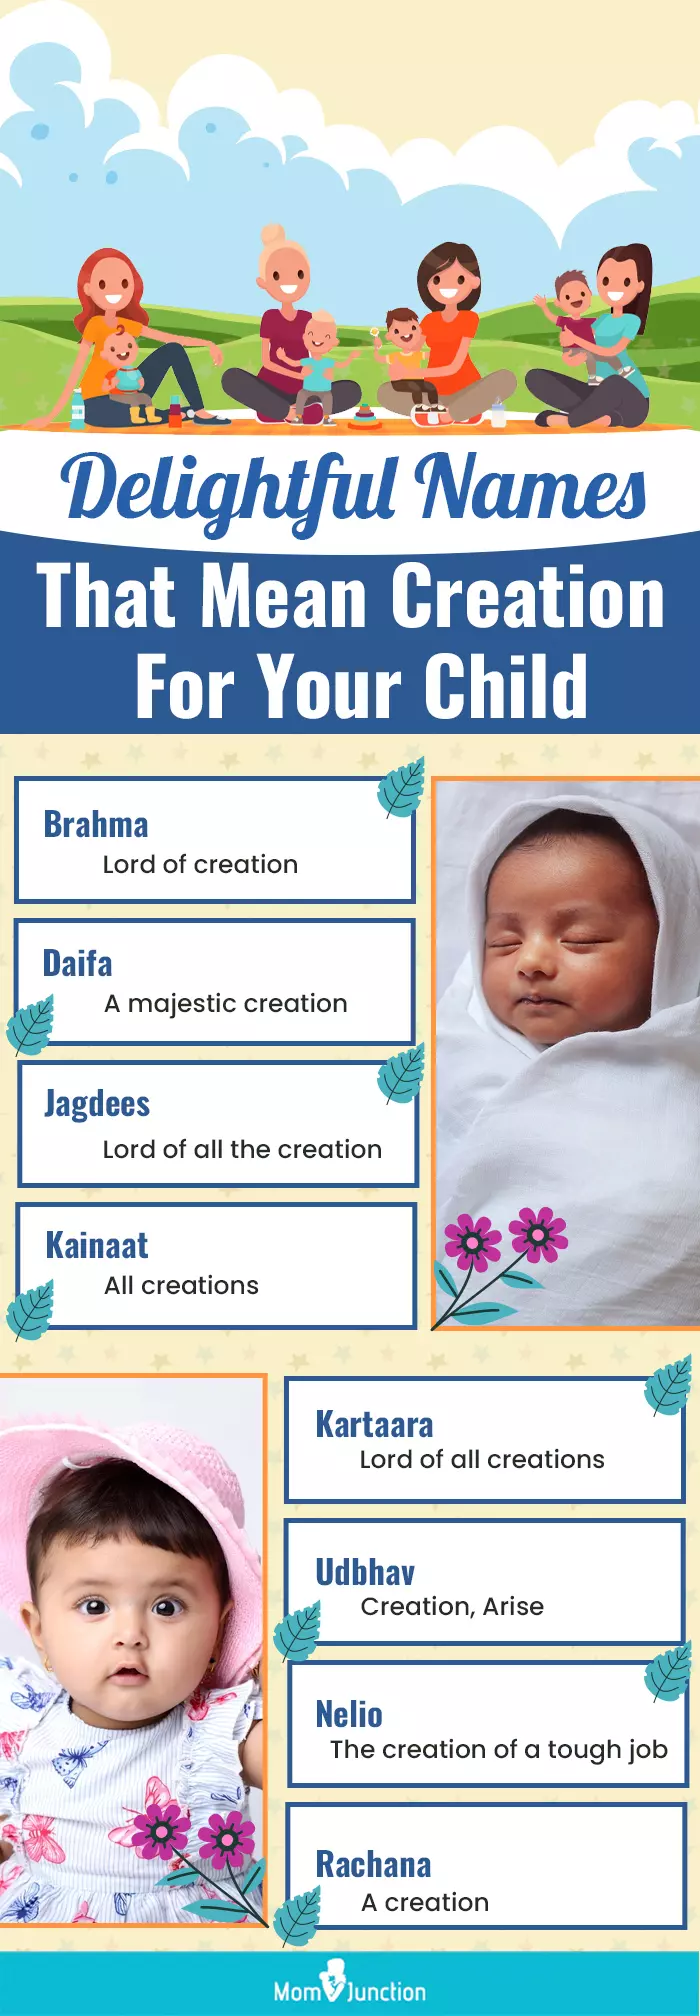 delightful names that mean creation for your child (infographic)